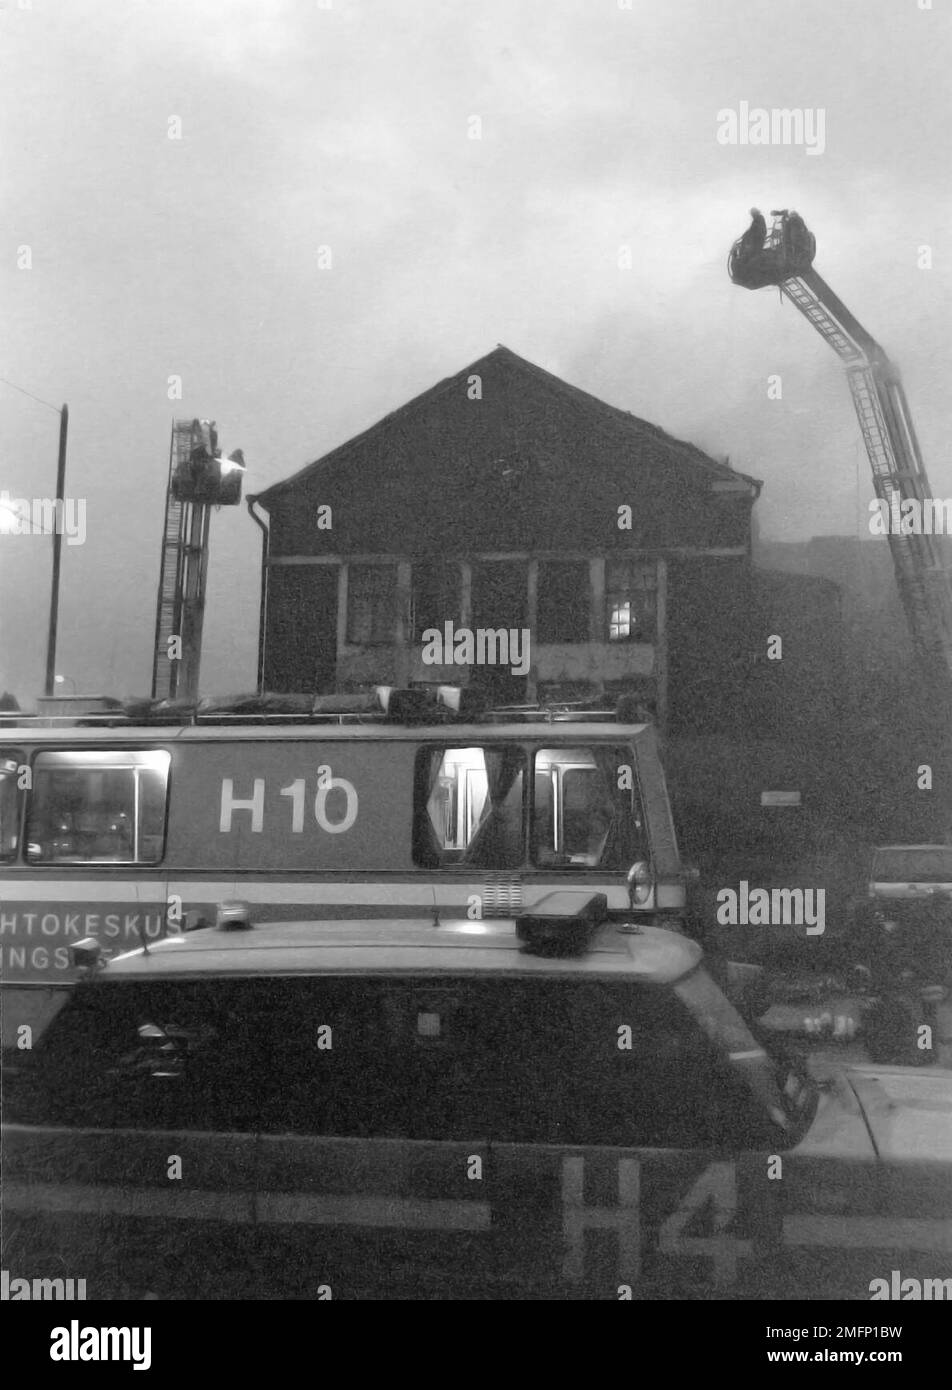 Helsinki fire department command vehicle (H4) and mobile command post vehicle (H10) at a fire in Sörnäinen, circa 1996. In the background, the fire is being fought from aerial work platforms. Stock Photo